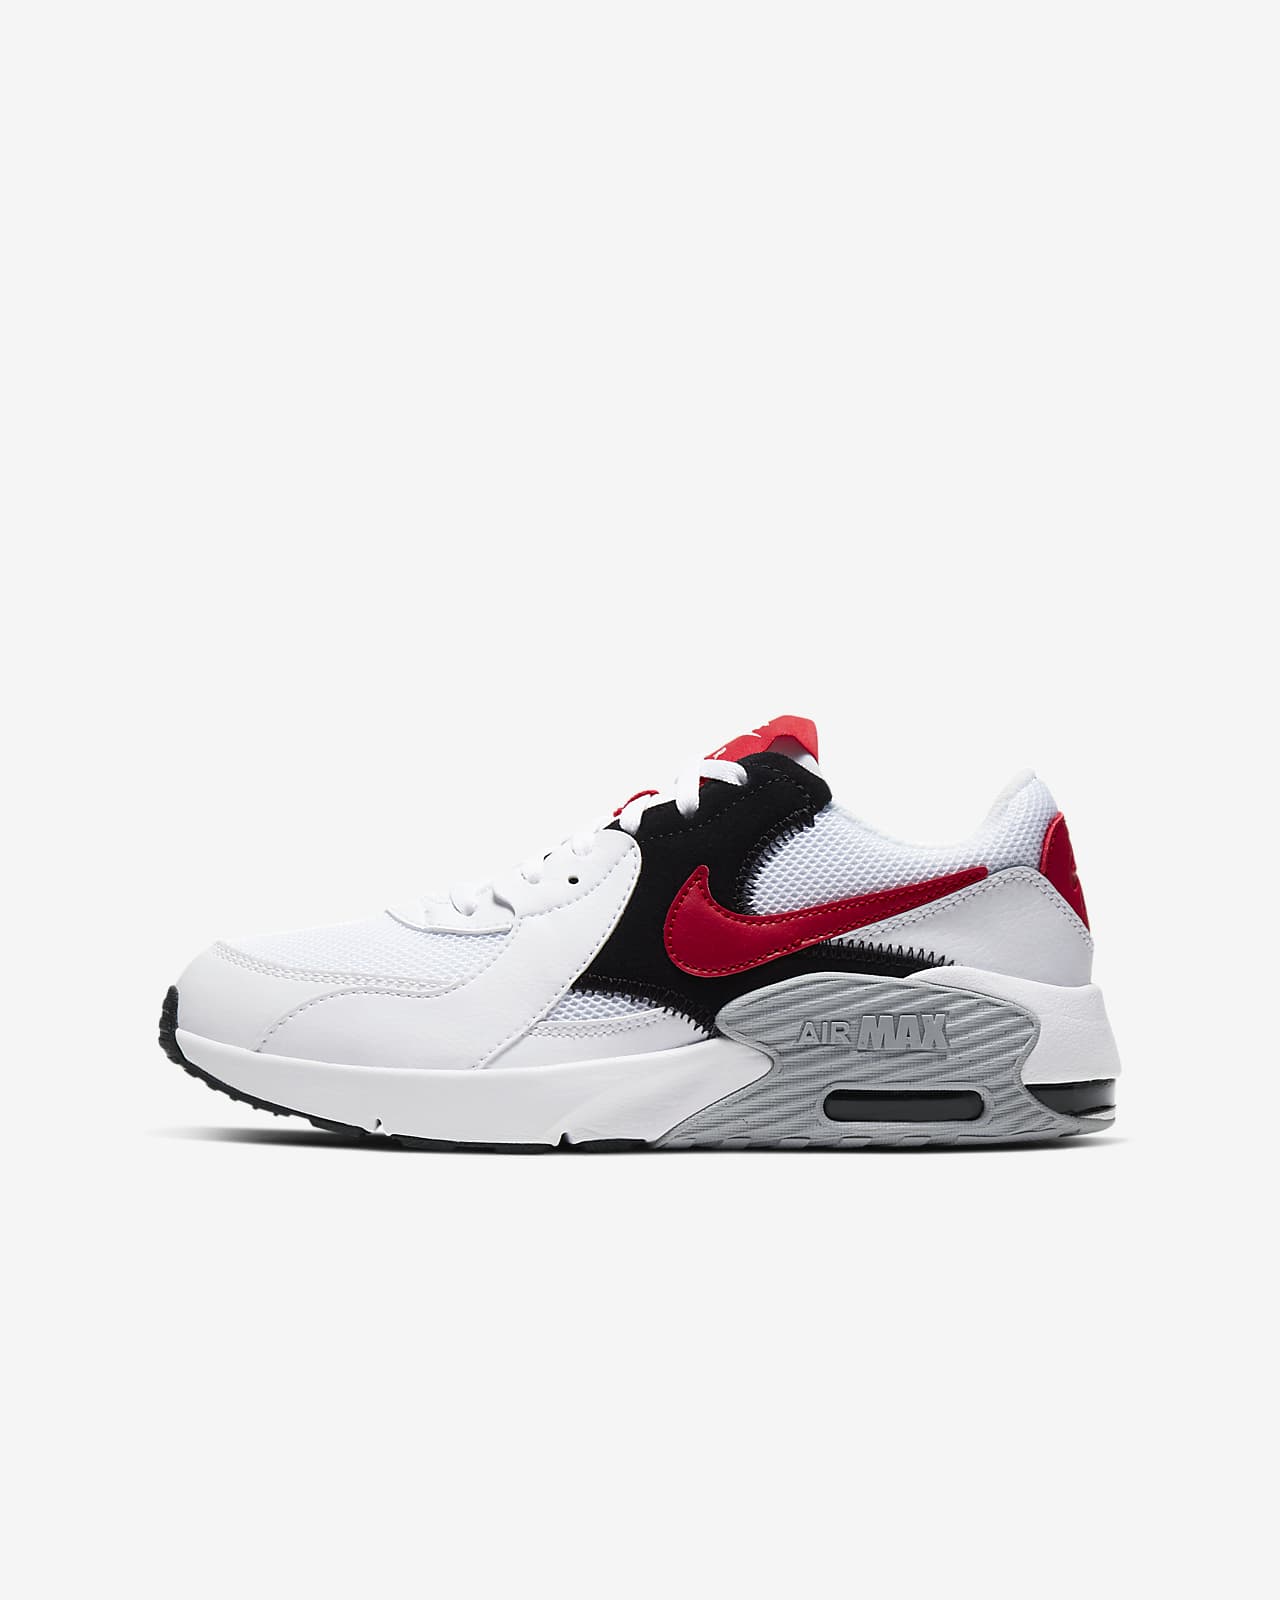 nike air max excee red white and blue